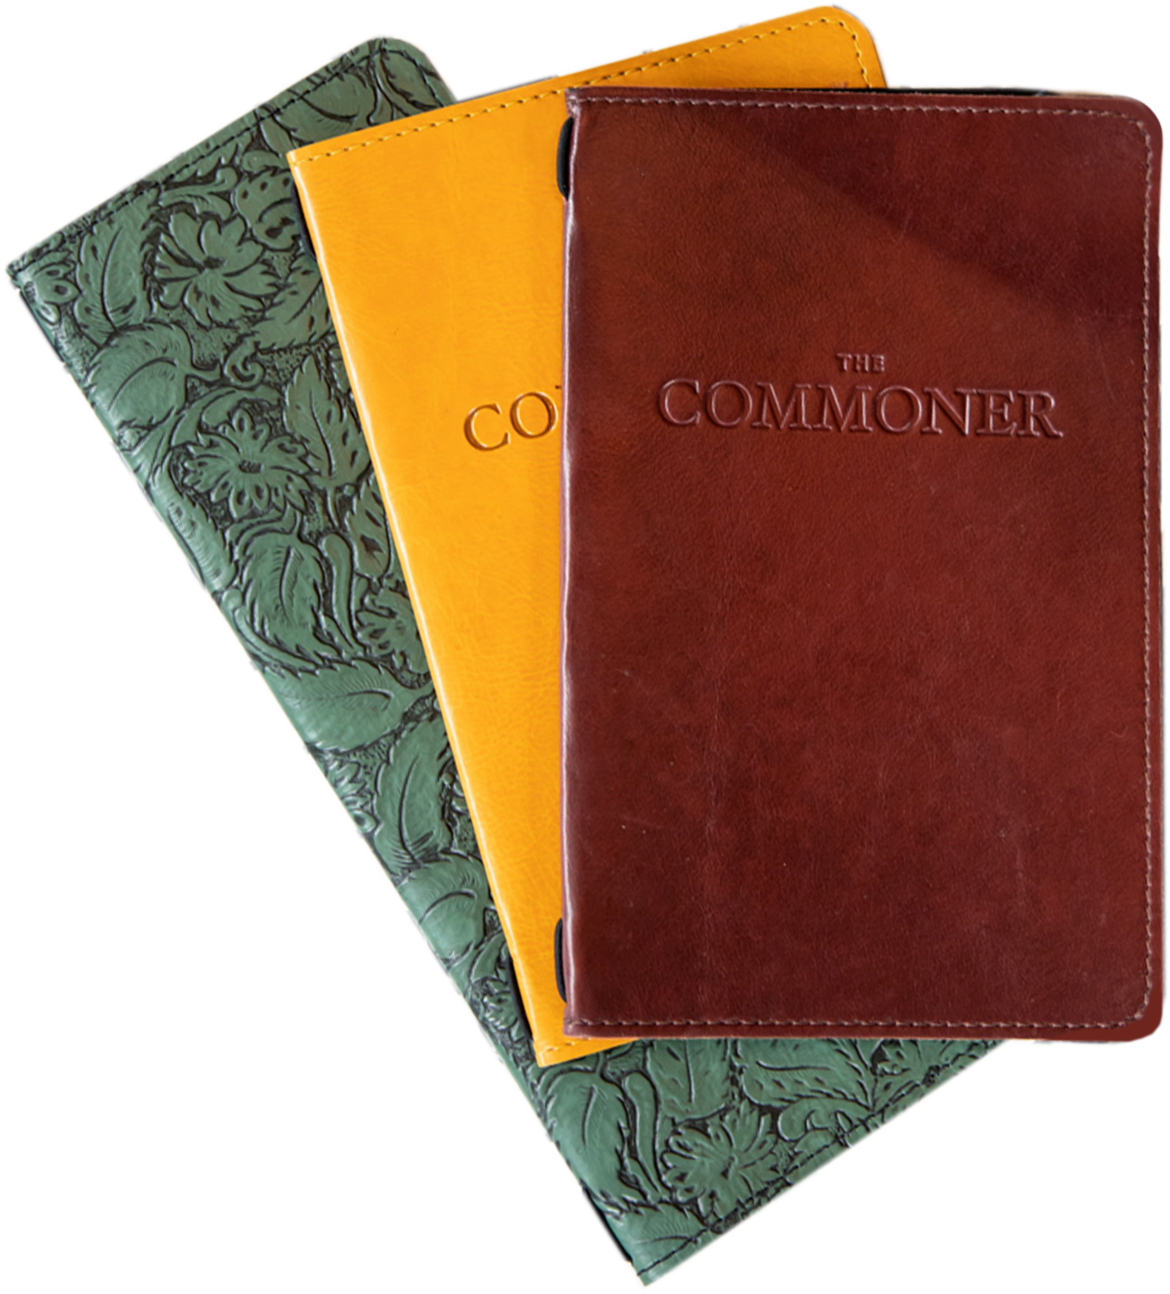 The menus of The Commoner Roncy in a stack.